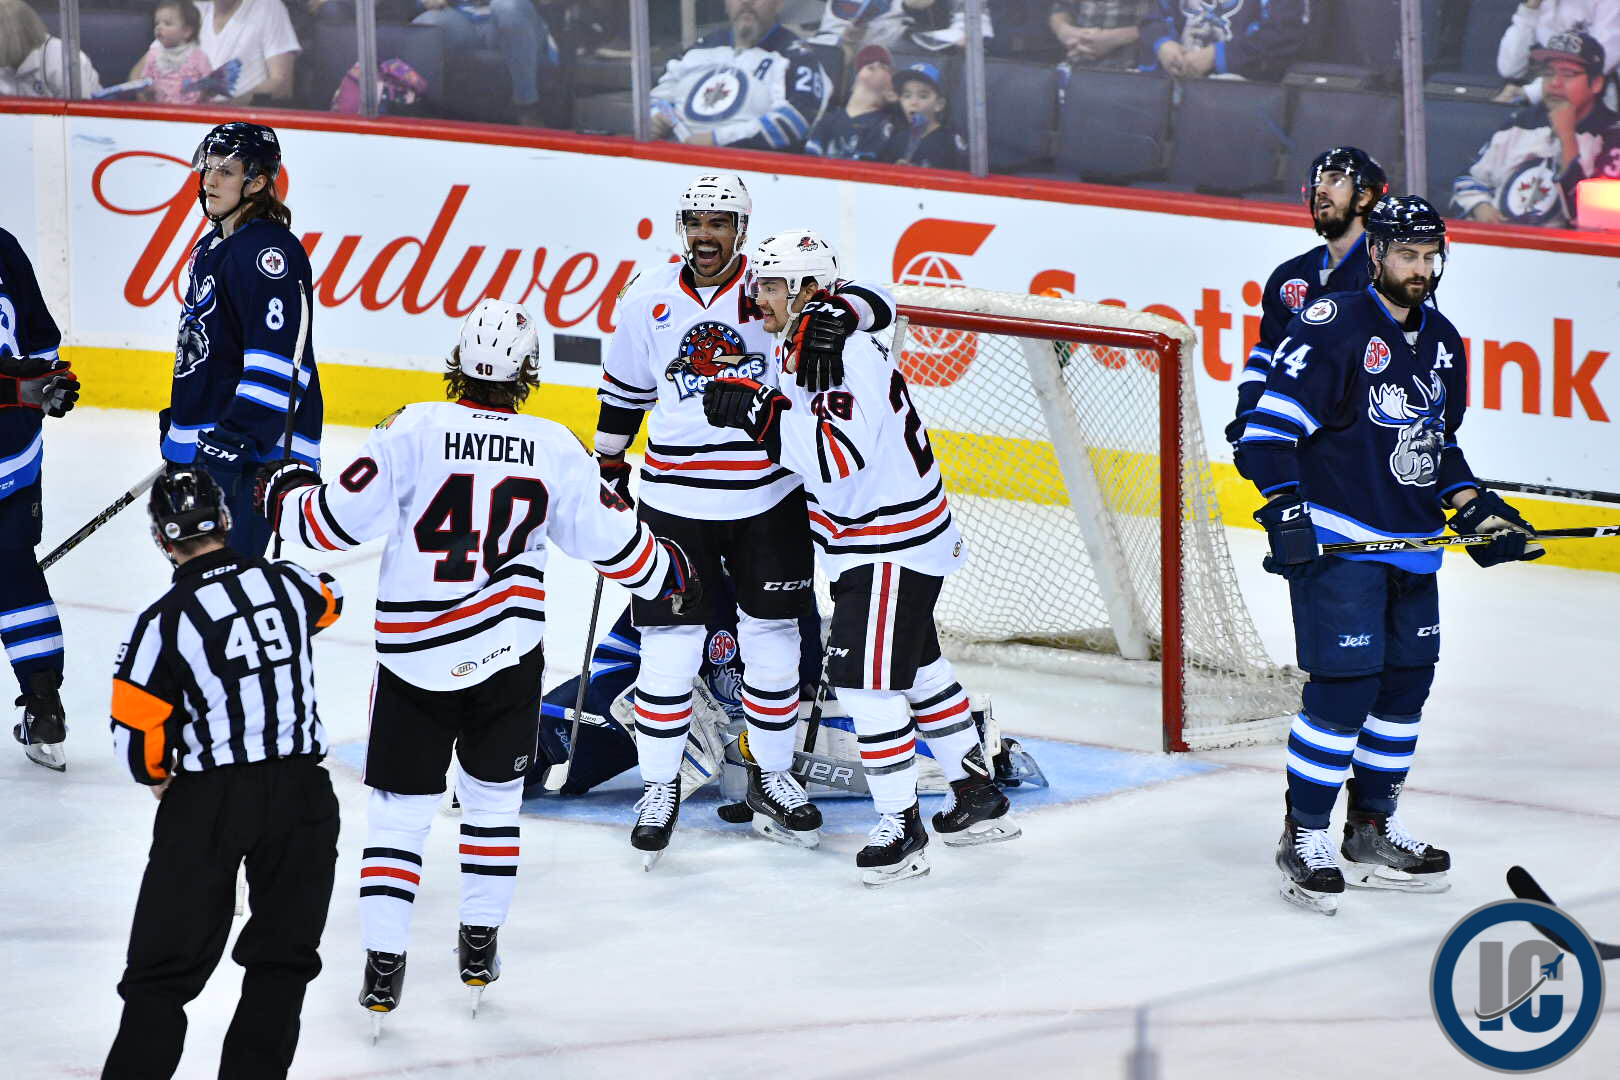 IceHogs win game 2